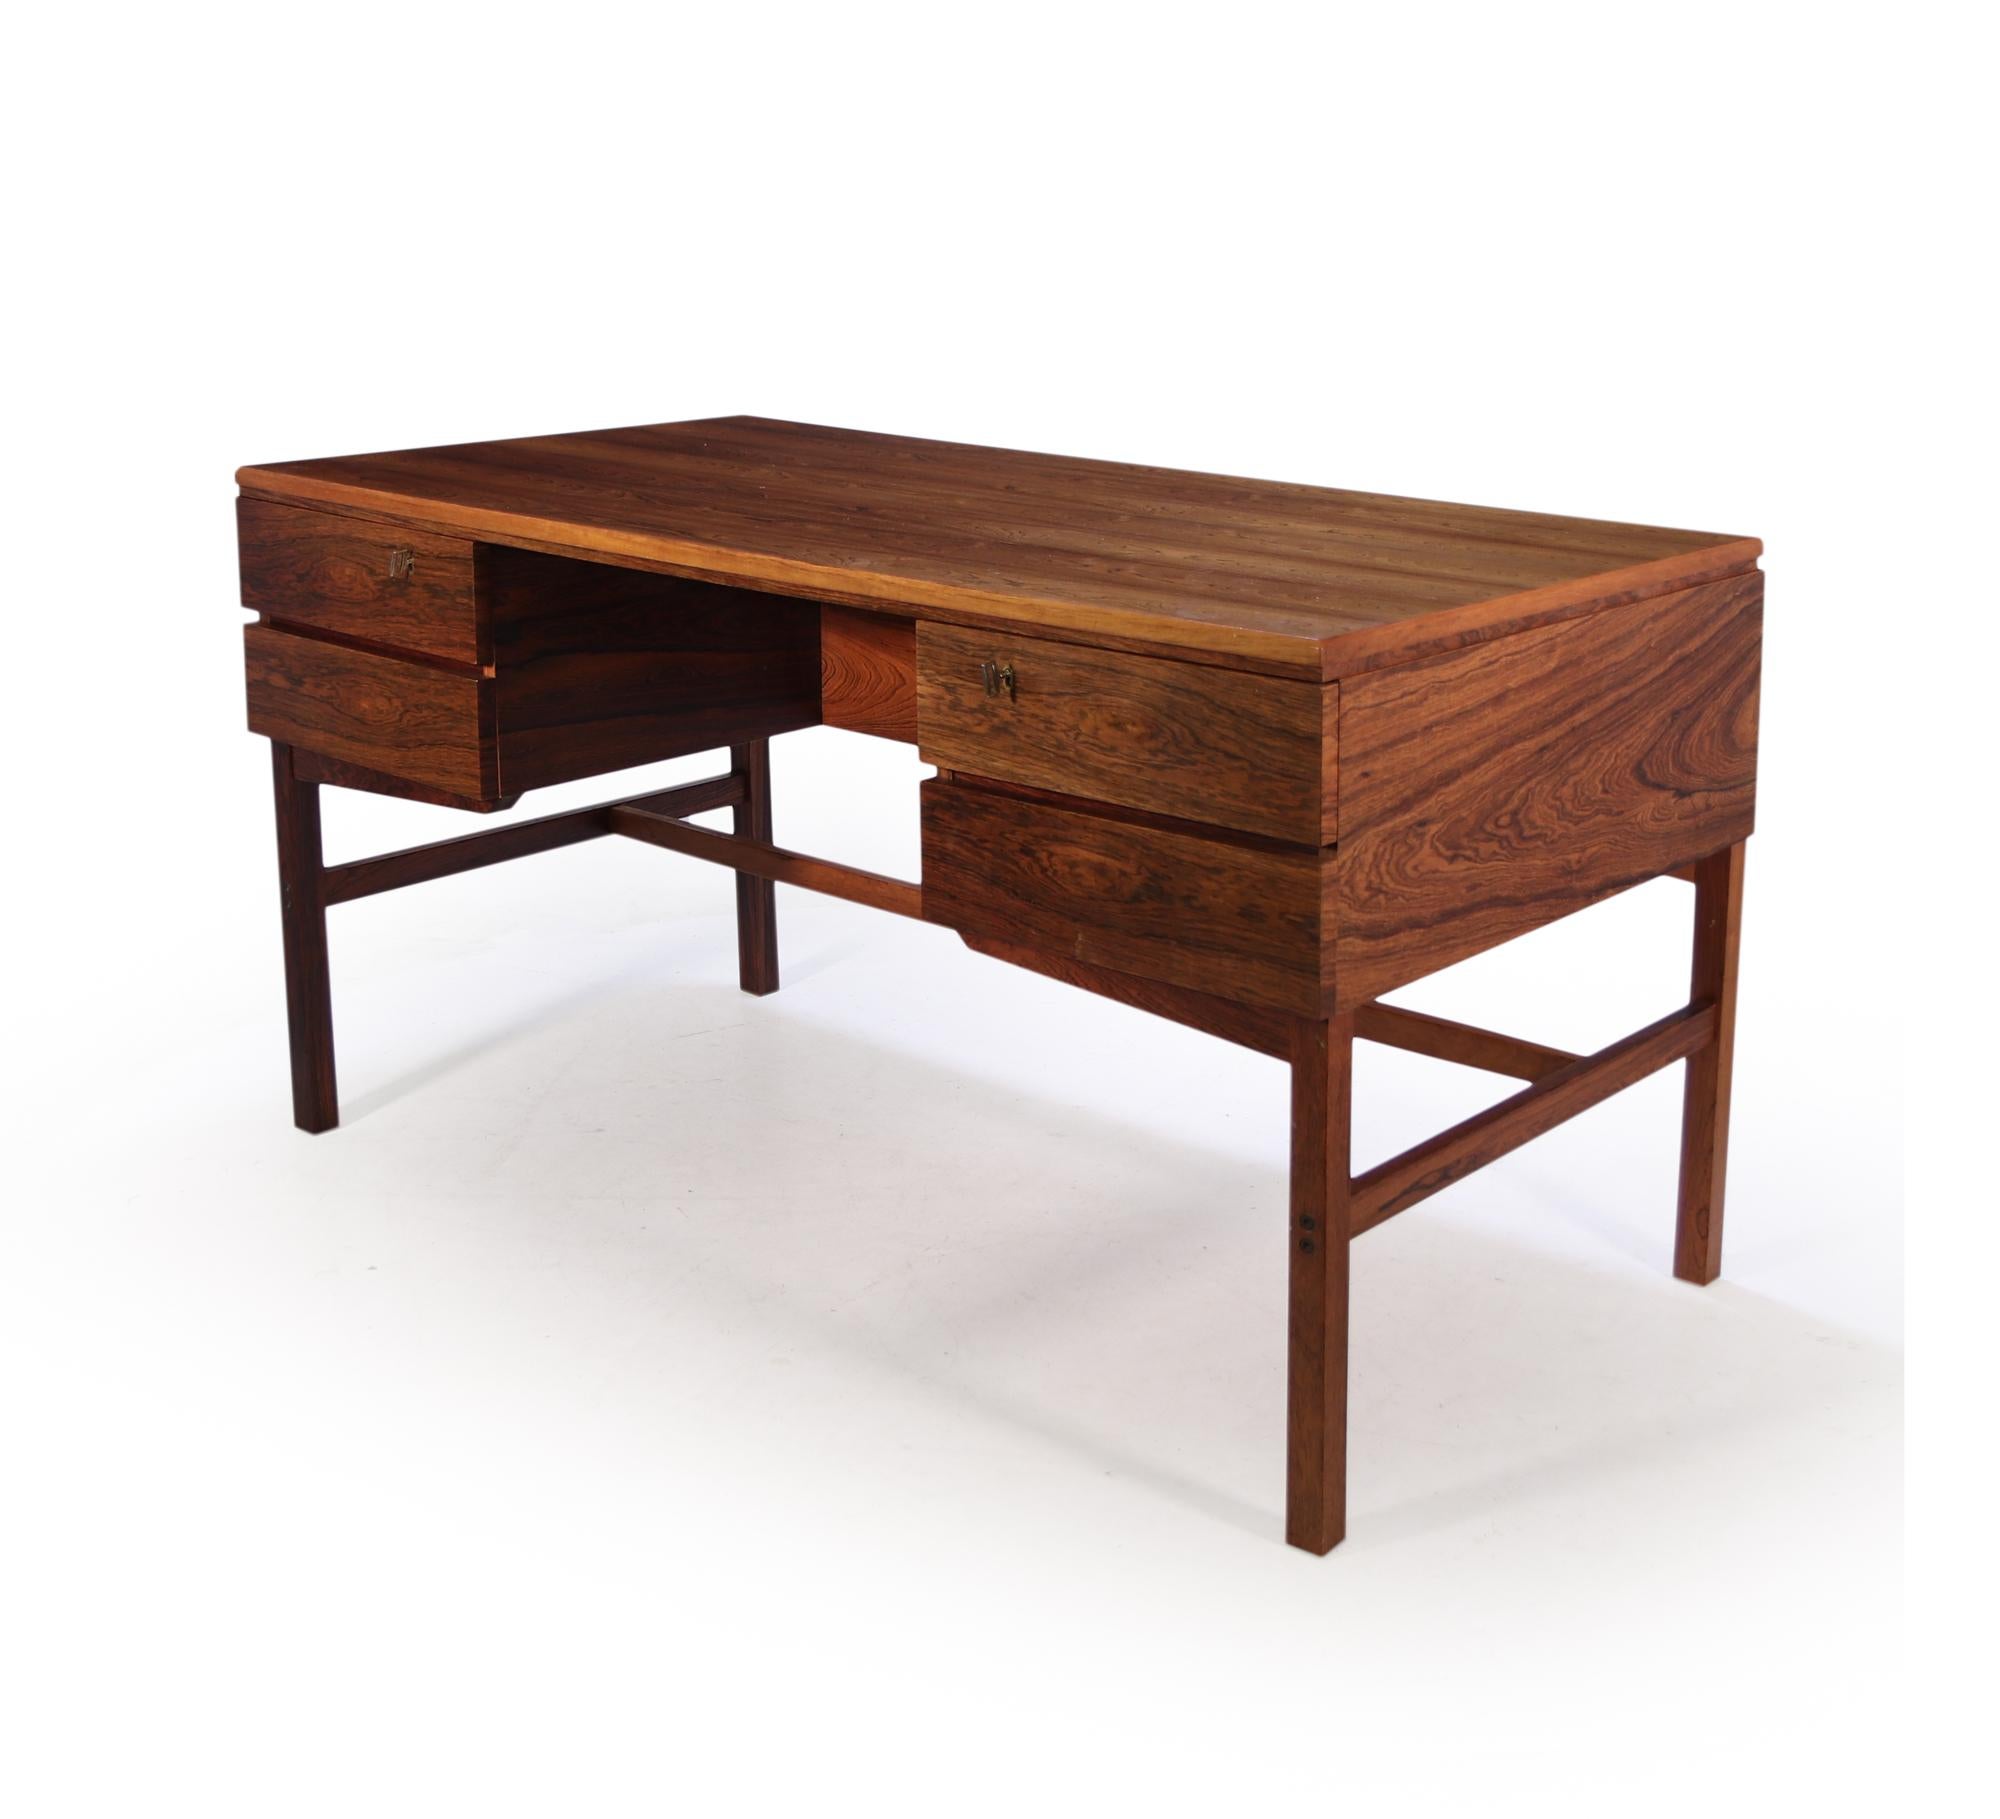 Mid-Century Modern freestanding Desk produced in Denmark in the 1960’s the desk has four drawers with the top two being lockable, with two keys supplied, to the back is a three sectional open bookcase, the desk is in excellent condition throughout